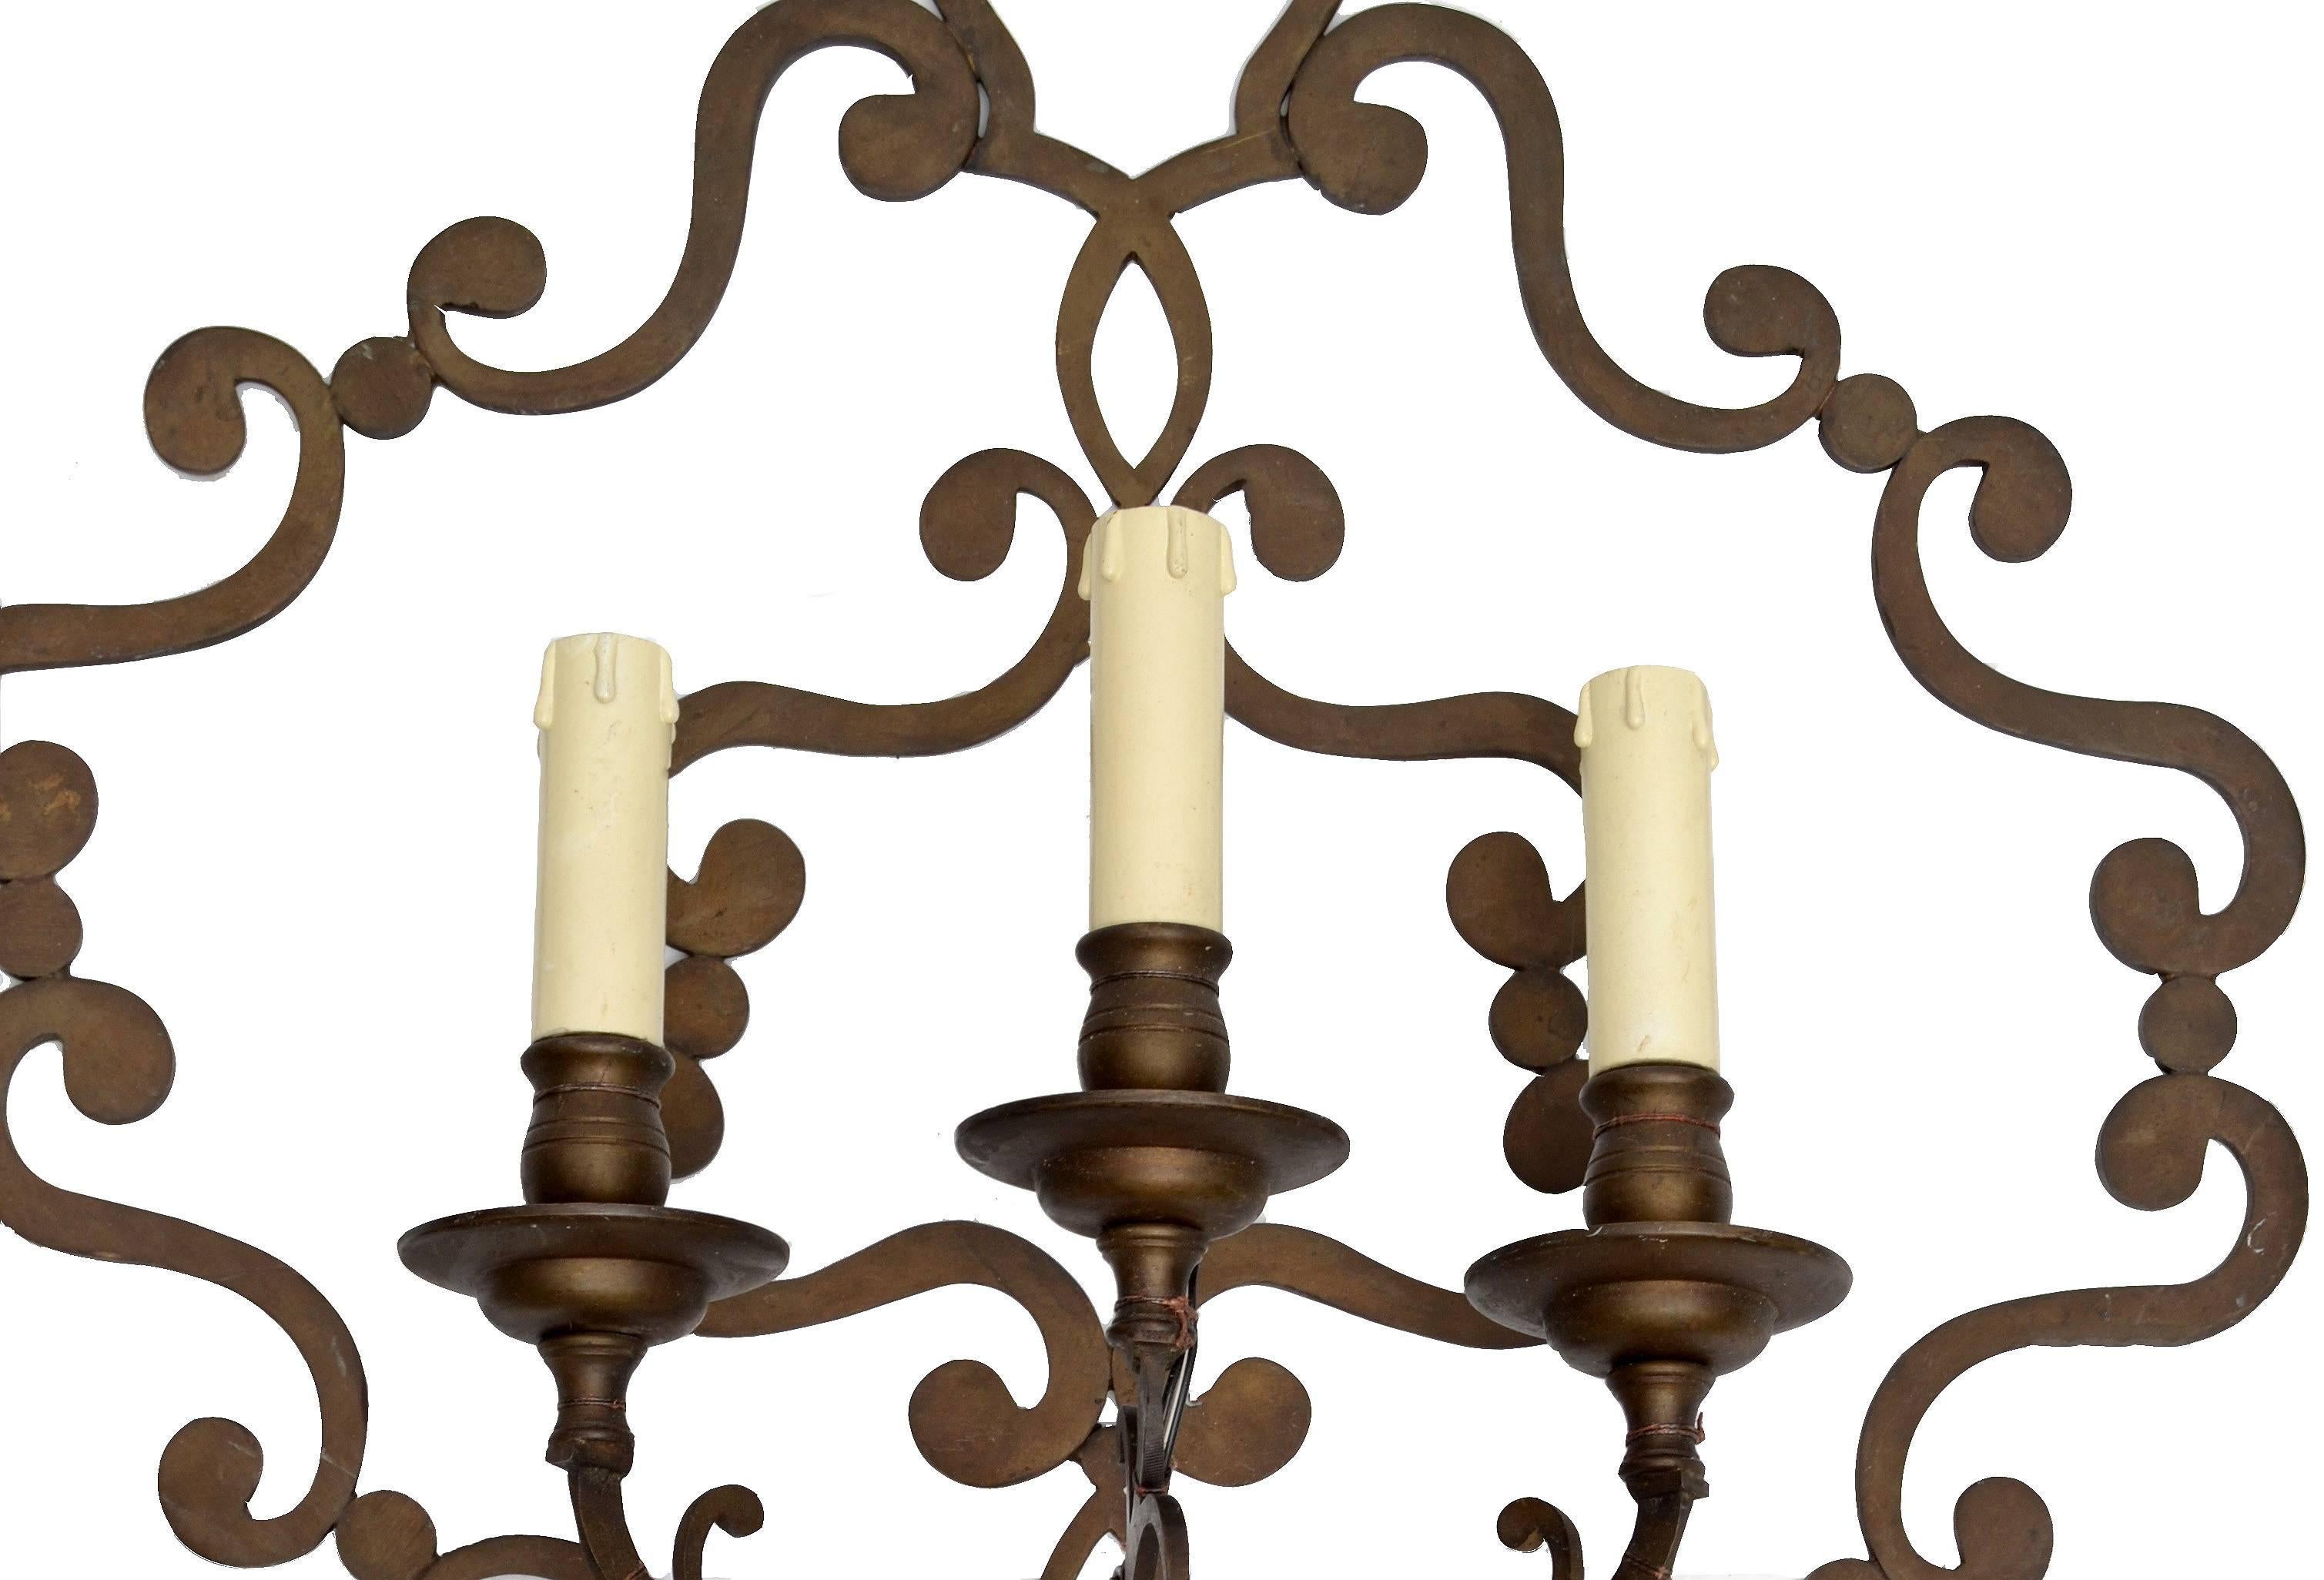 Wrought iron three-light applique, wall sconce from Italy.
Wired for the U.S. prior shipping and uses each a max. 40 watts light bulb.
In good used condition with normal signs of wear and tear.
